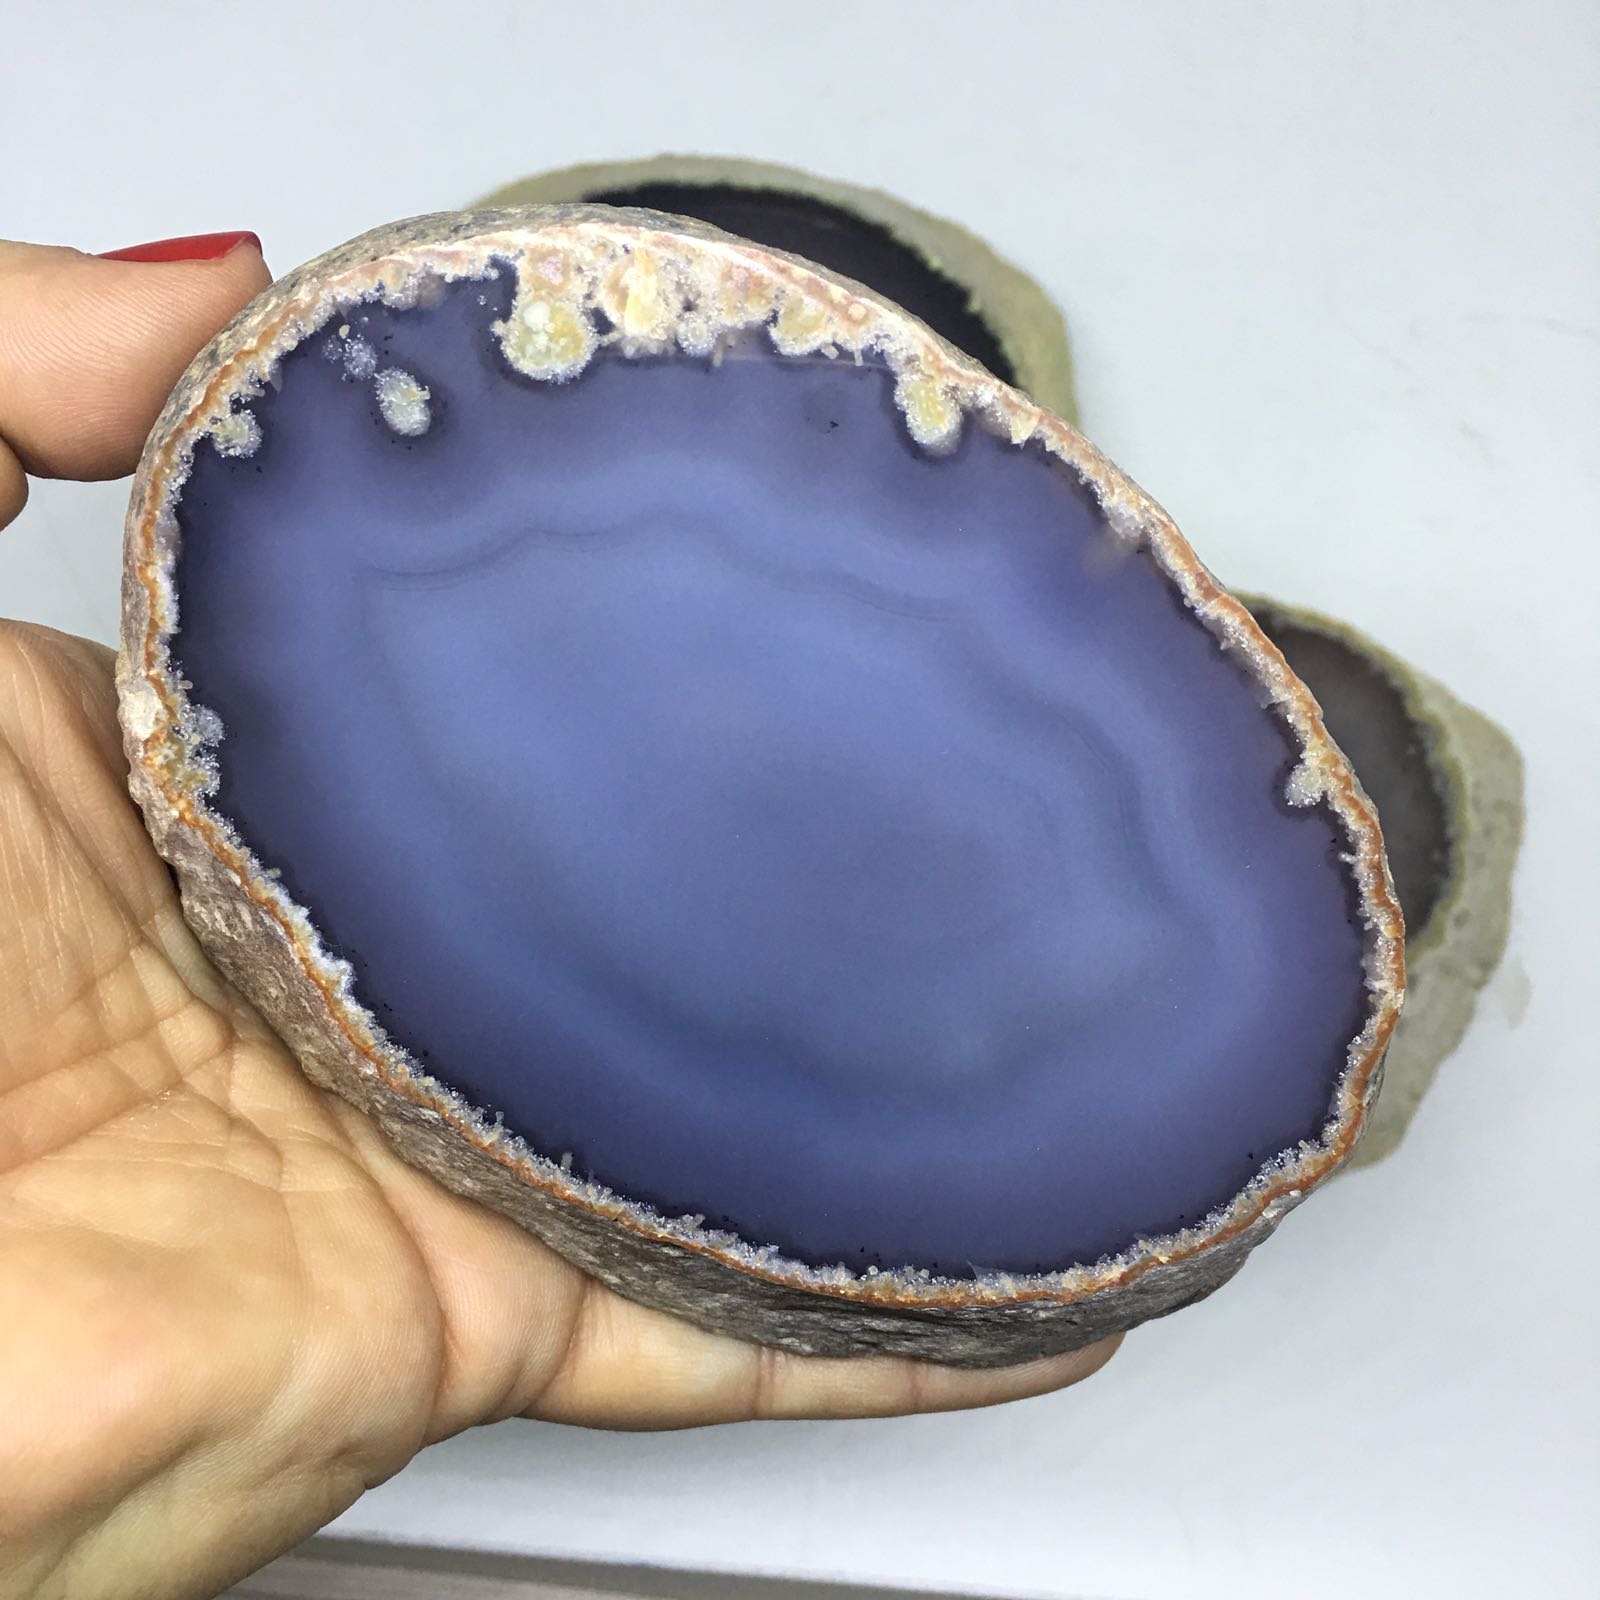 Stones from Uruguay - Natural Water Agate Geode  with Water Trapped-Enhydro Geode (Water Agate)